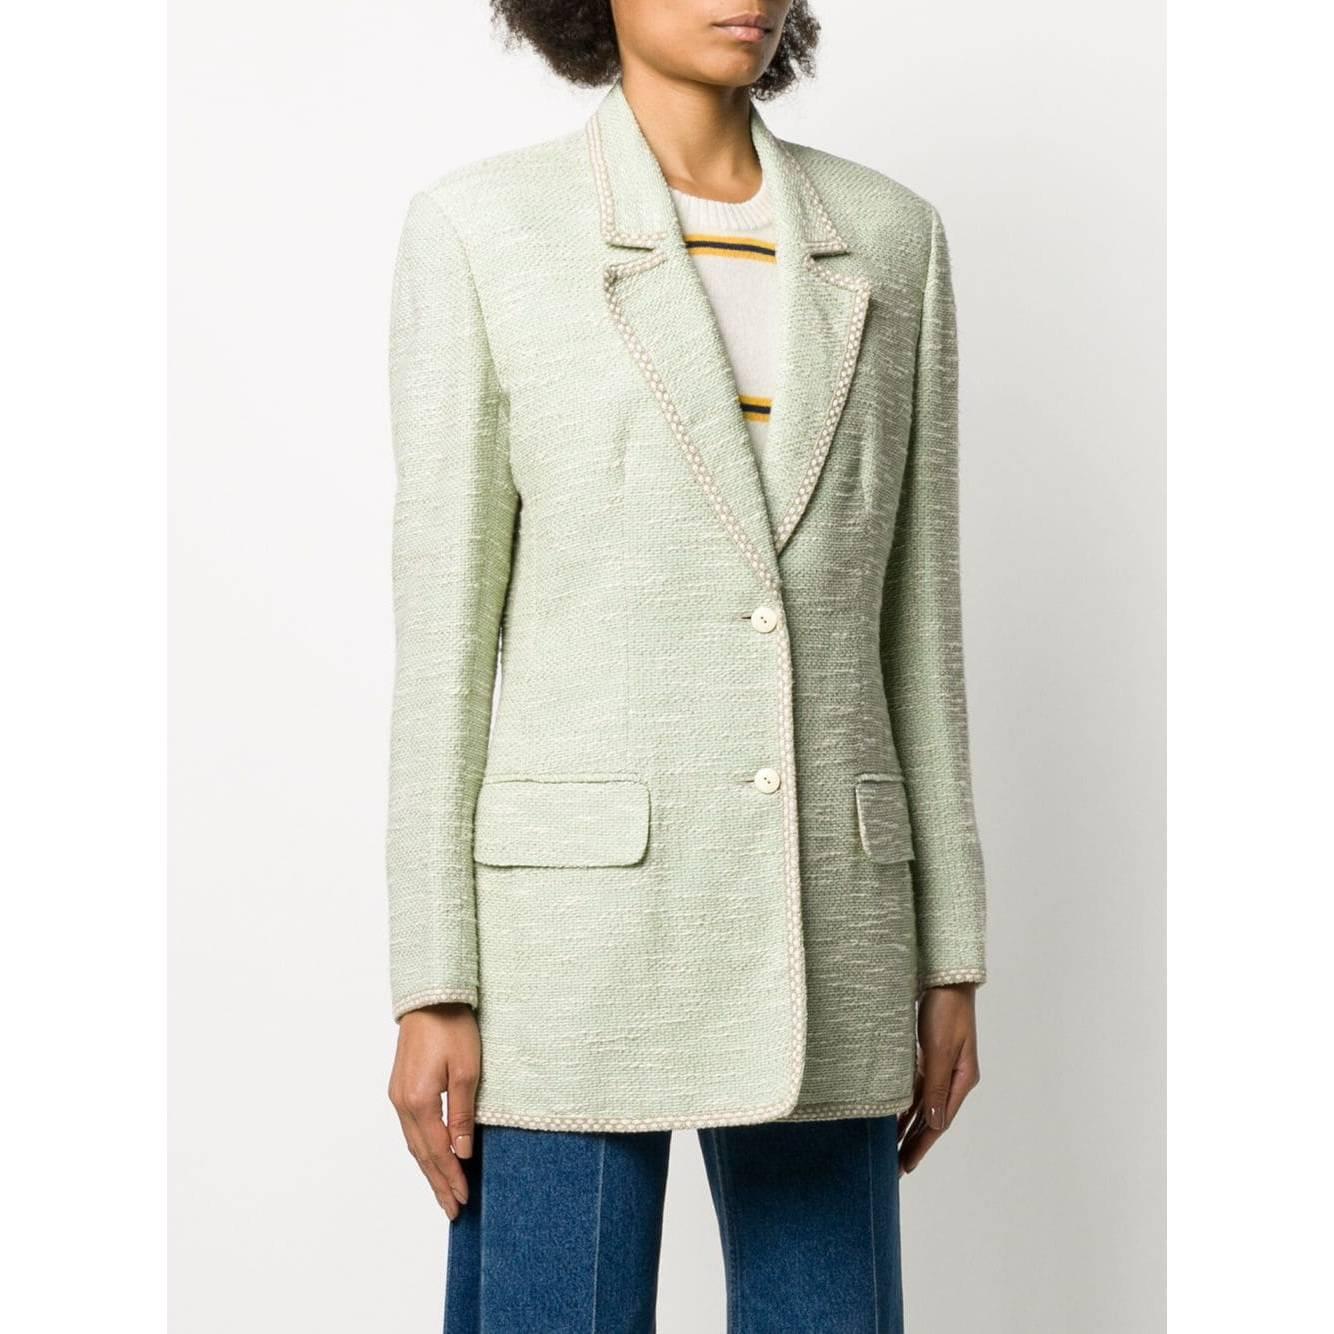 A.N.G.E.L.O. Vintage - ITALY
Valentino pastel mint green cotton blend blazer with beige and white intertwined threads. Model with classic lapel collar, single-breasted closure with buttons. Two flap pockets and long sleeves.

Years: 80s

Made in